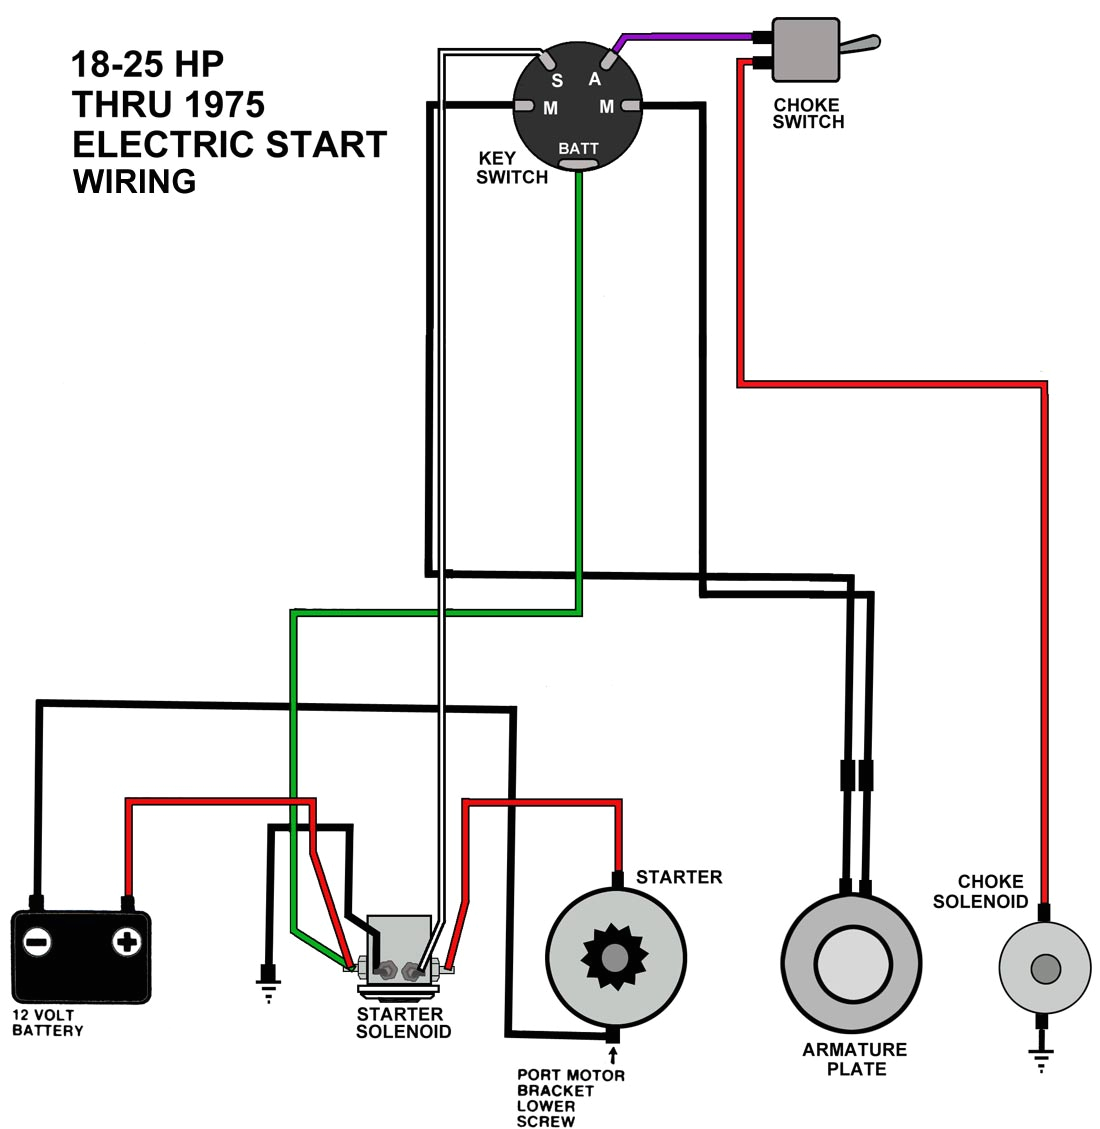 agm ignition switch wiring wiring diagram operations agm ignition switch wiring